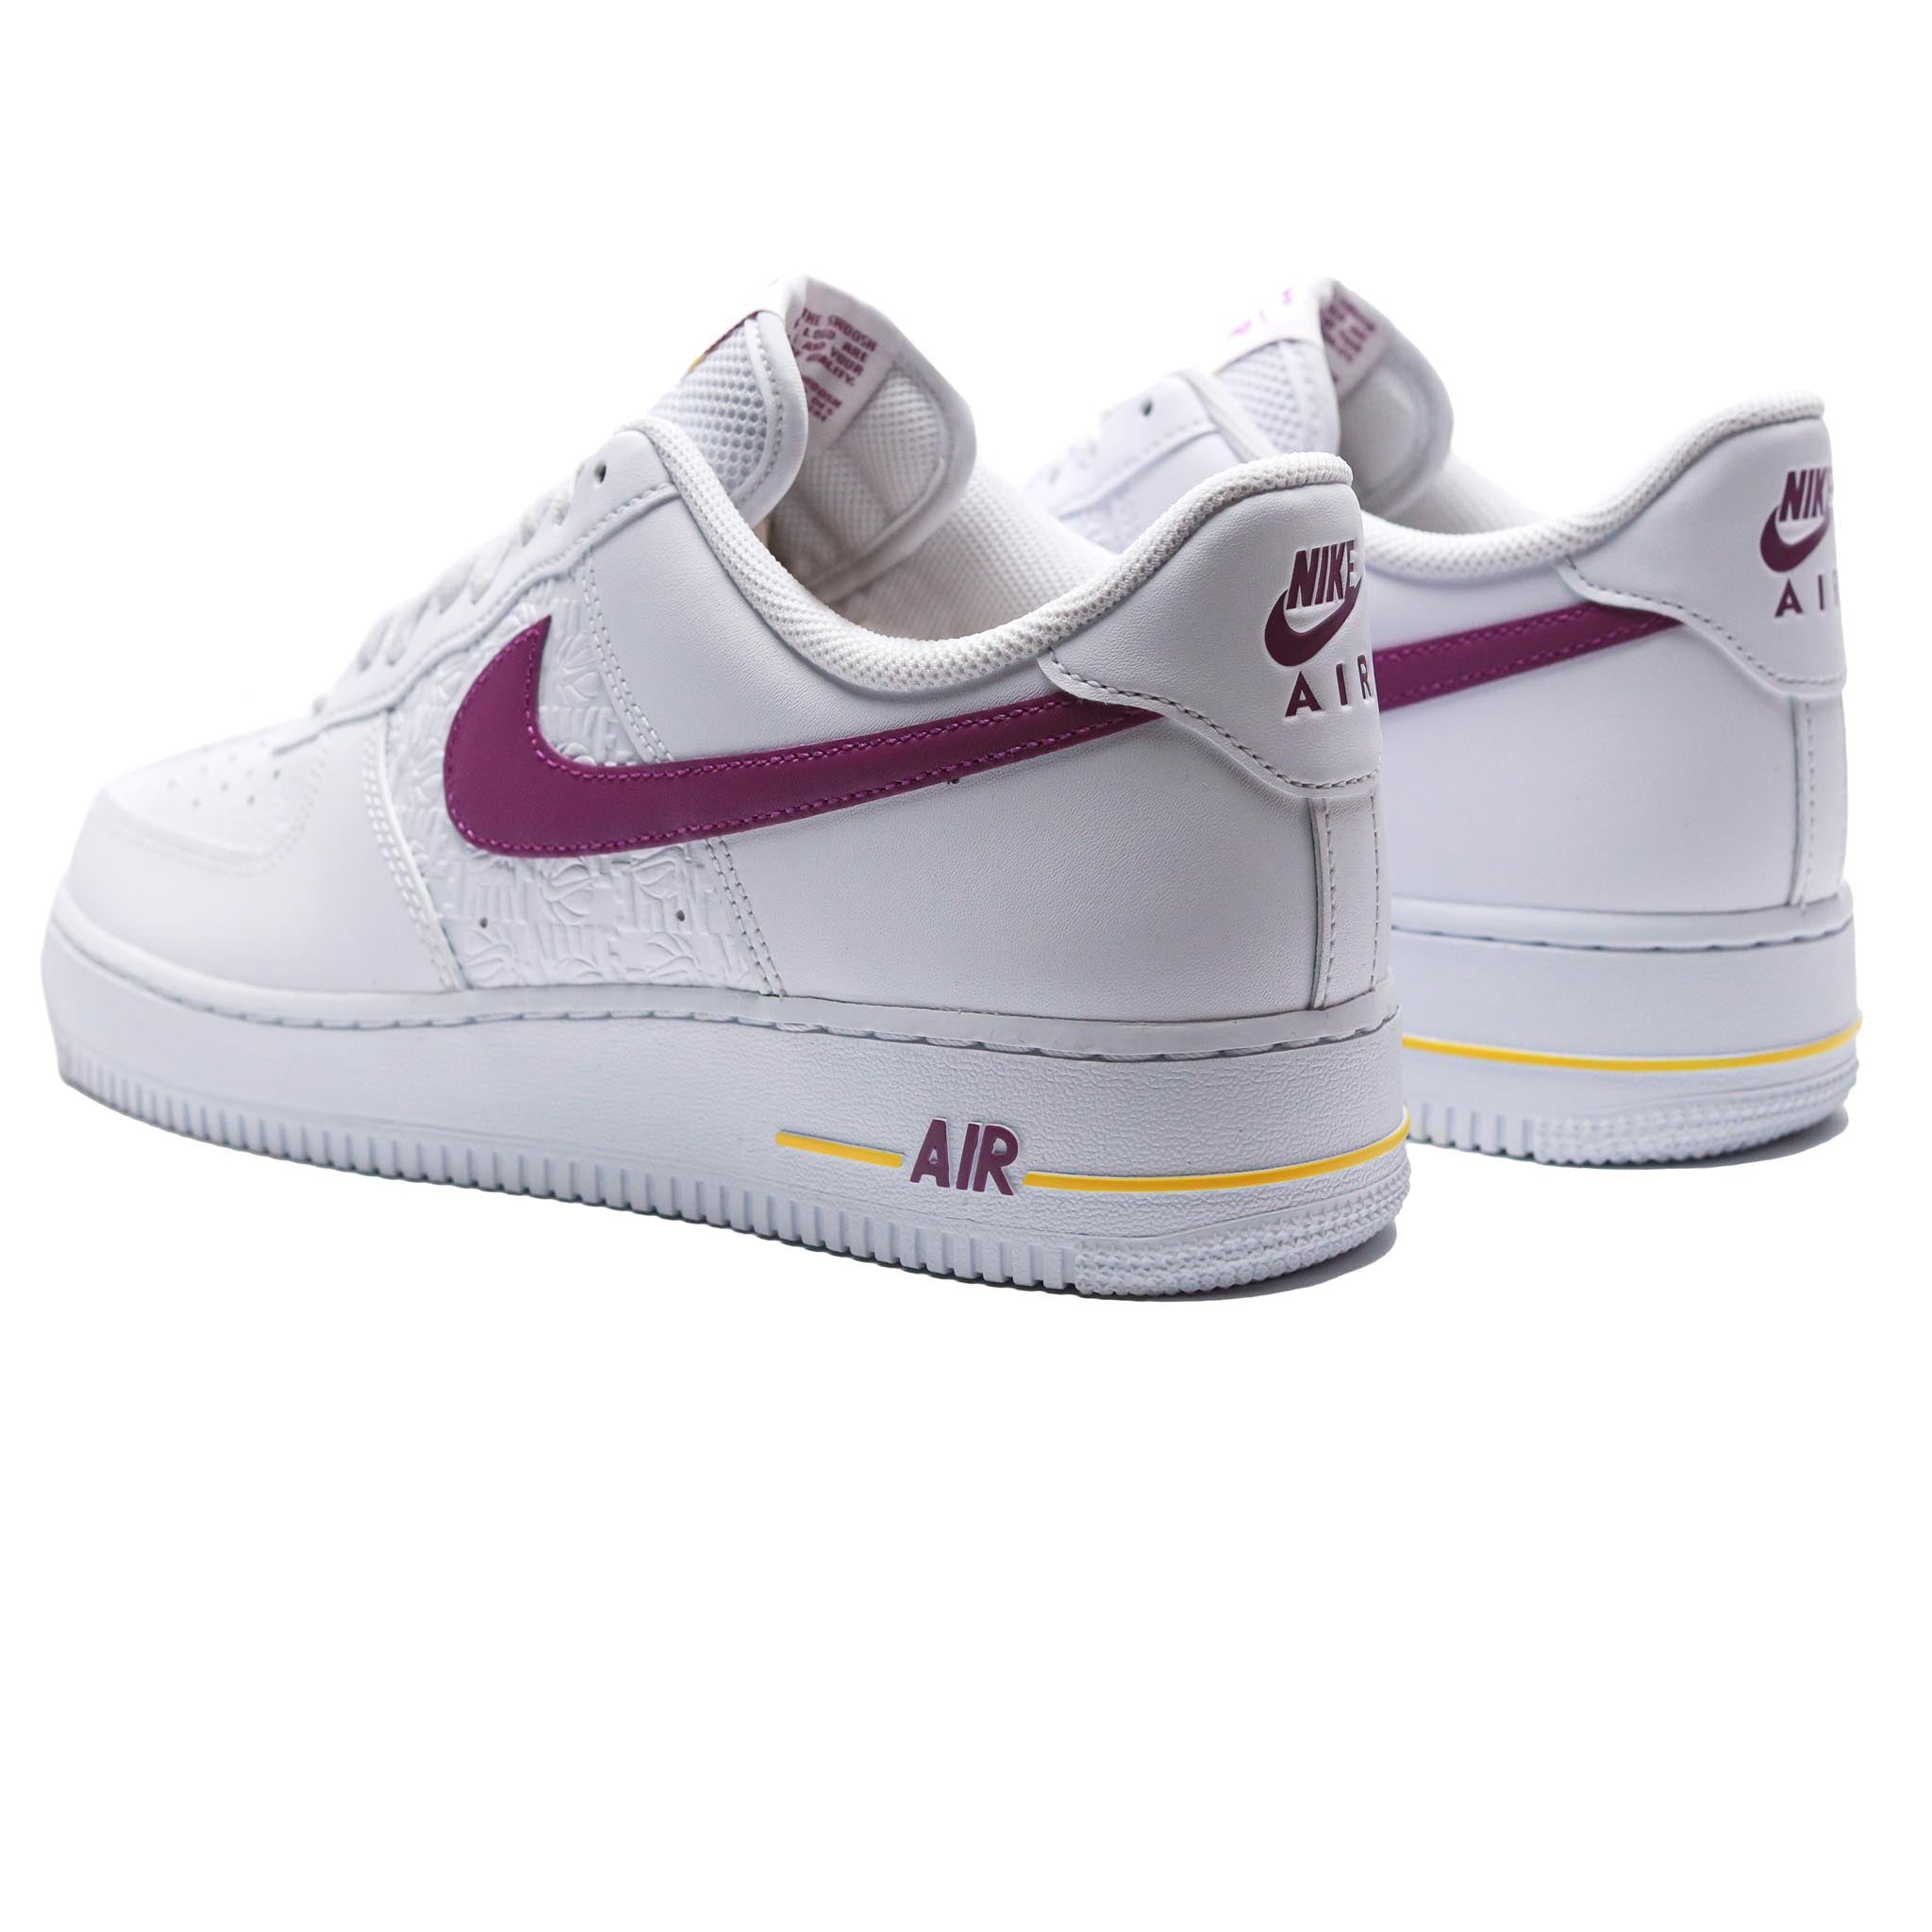 Nike Air Force 1 Low EMB Lakers sneakers: Where to buy, price, and more  explored